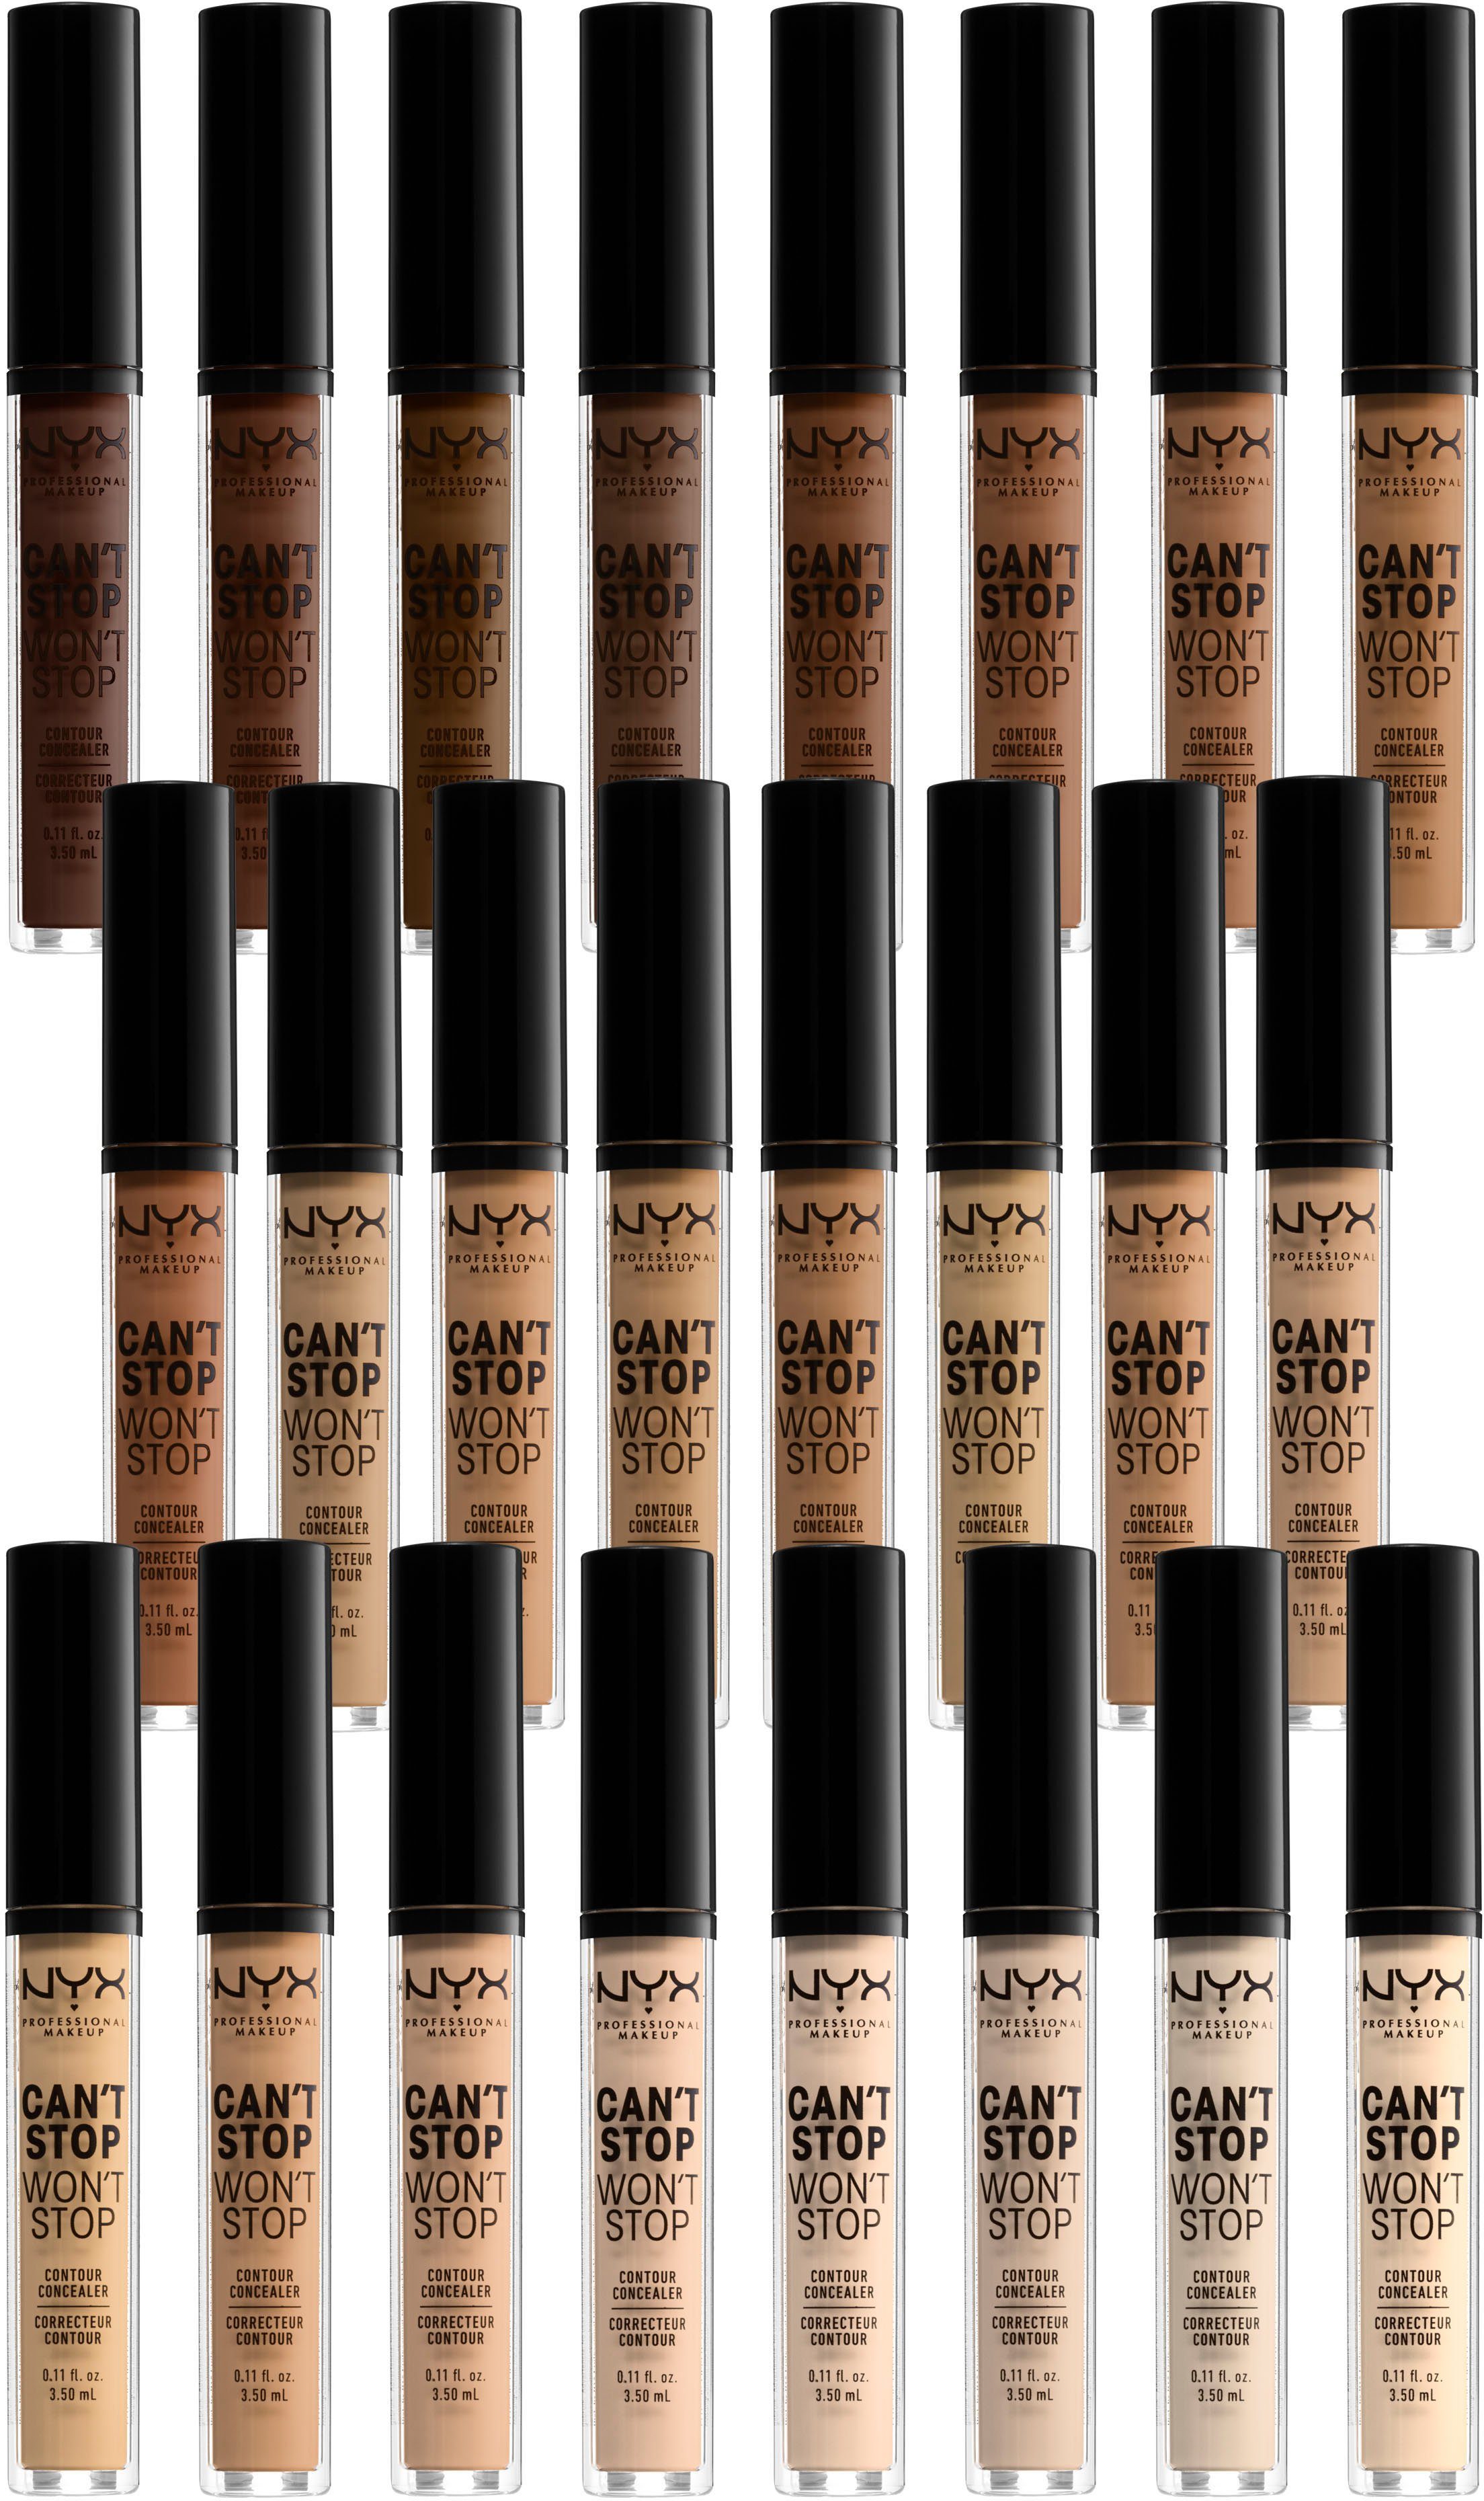 NYX Concealer NYX Professional Stop Alabaster Concealer Stop CSWSC02 Can´t Makeup Won´t